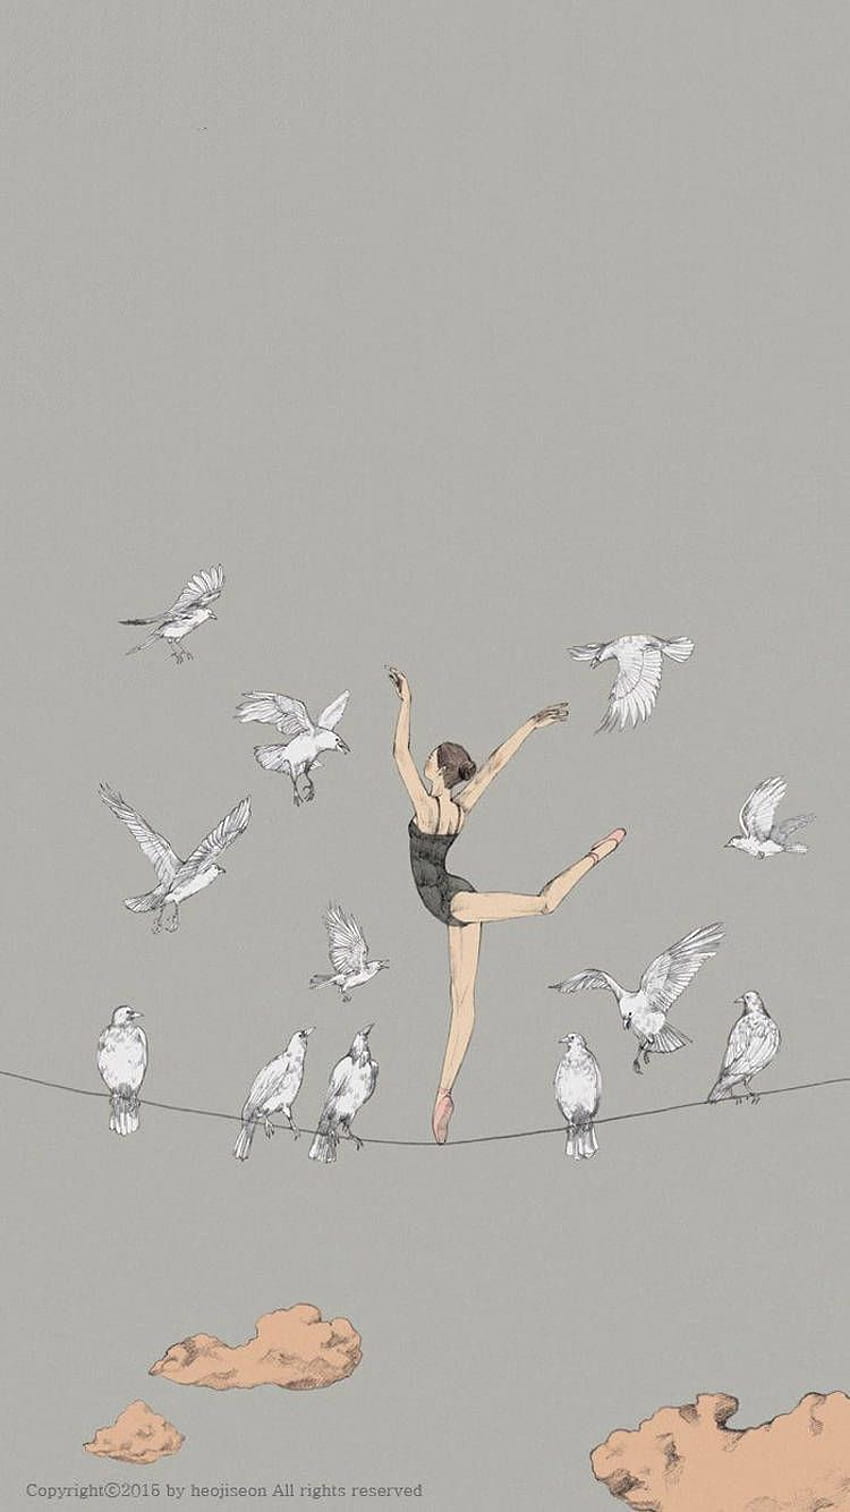 A woman is balancing on the wire while birds fly around her - Ballet, illustration